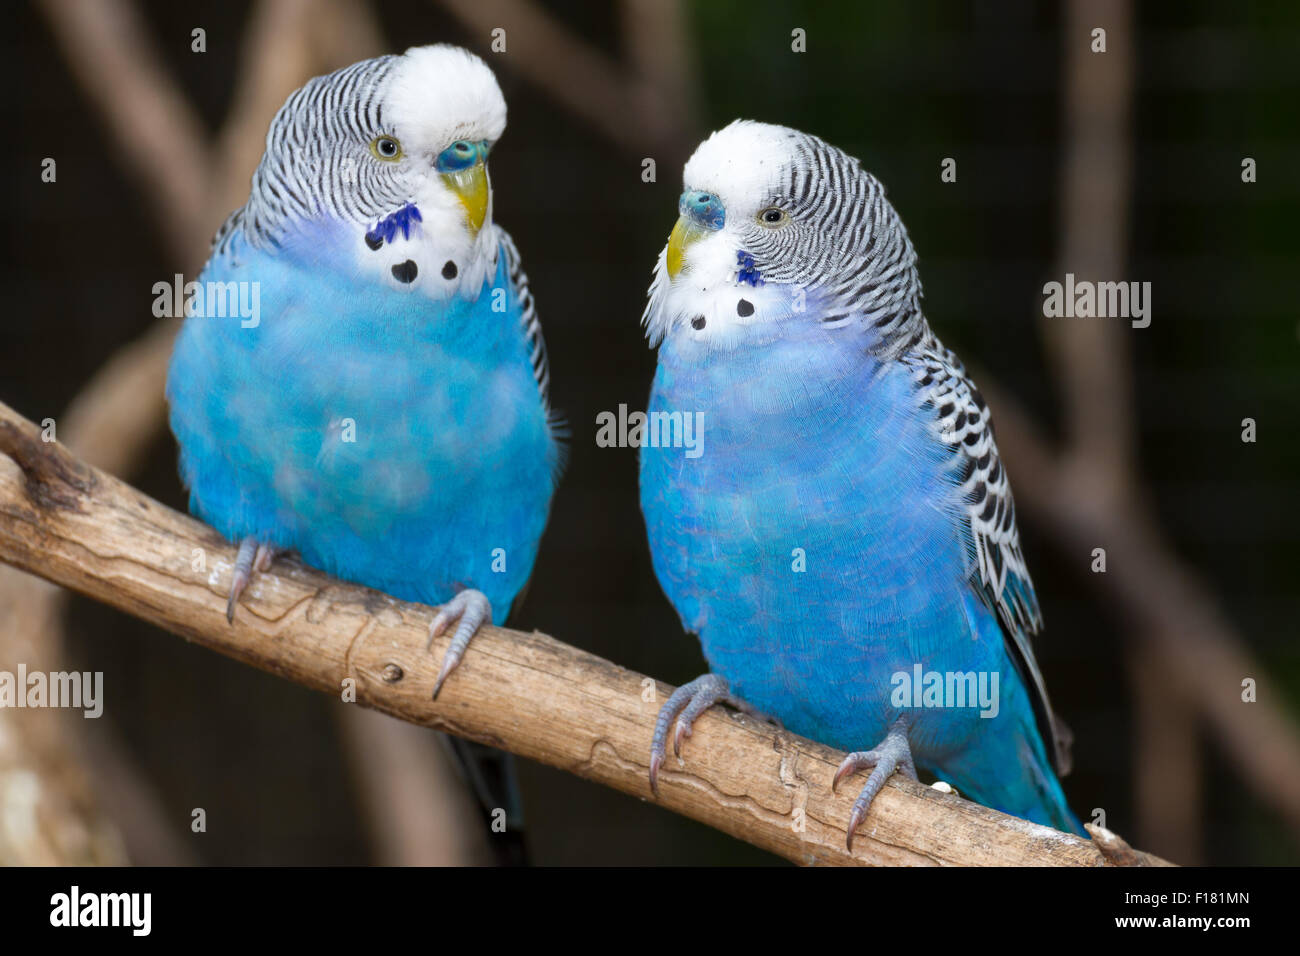 Two blue parakeets perched. Stock Photo